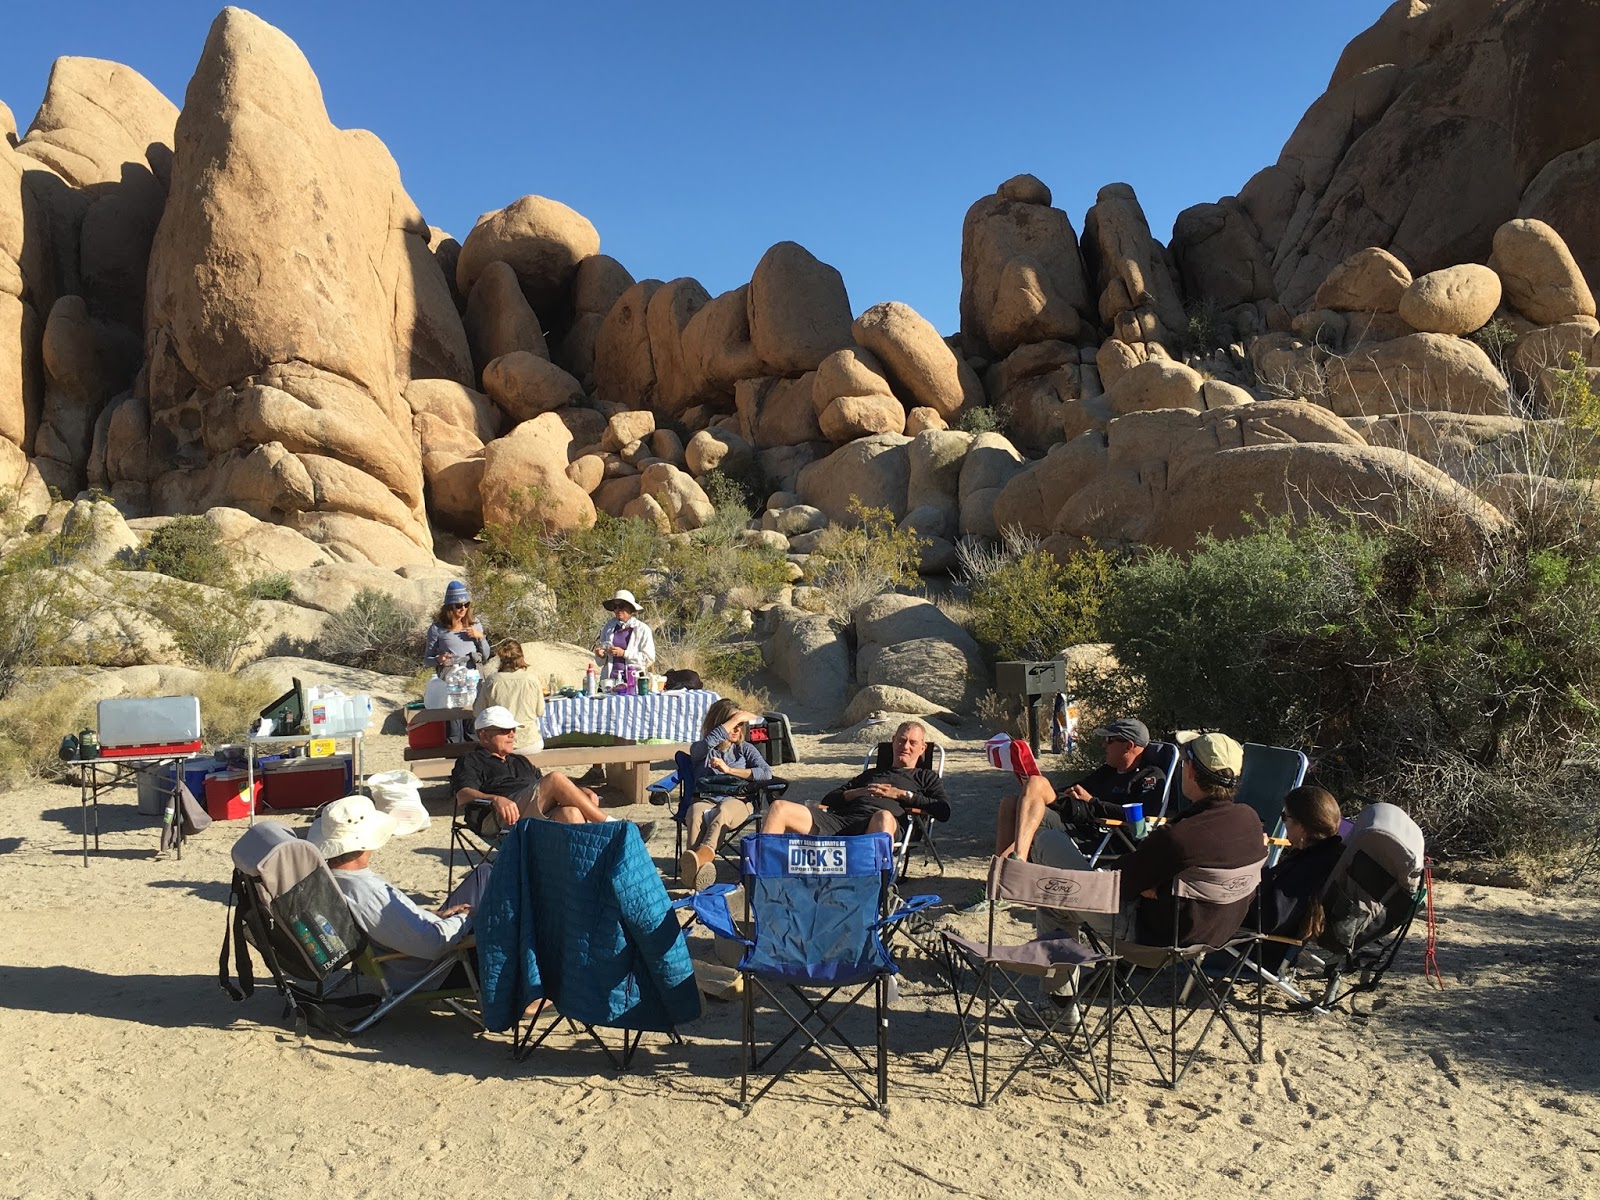 Joshua Tree National Park Tour In One Day Hoffy Tours